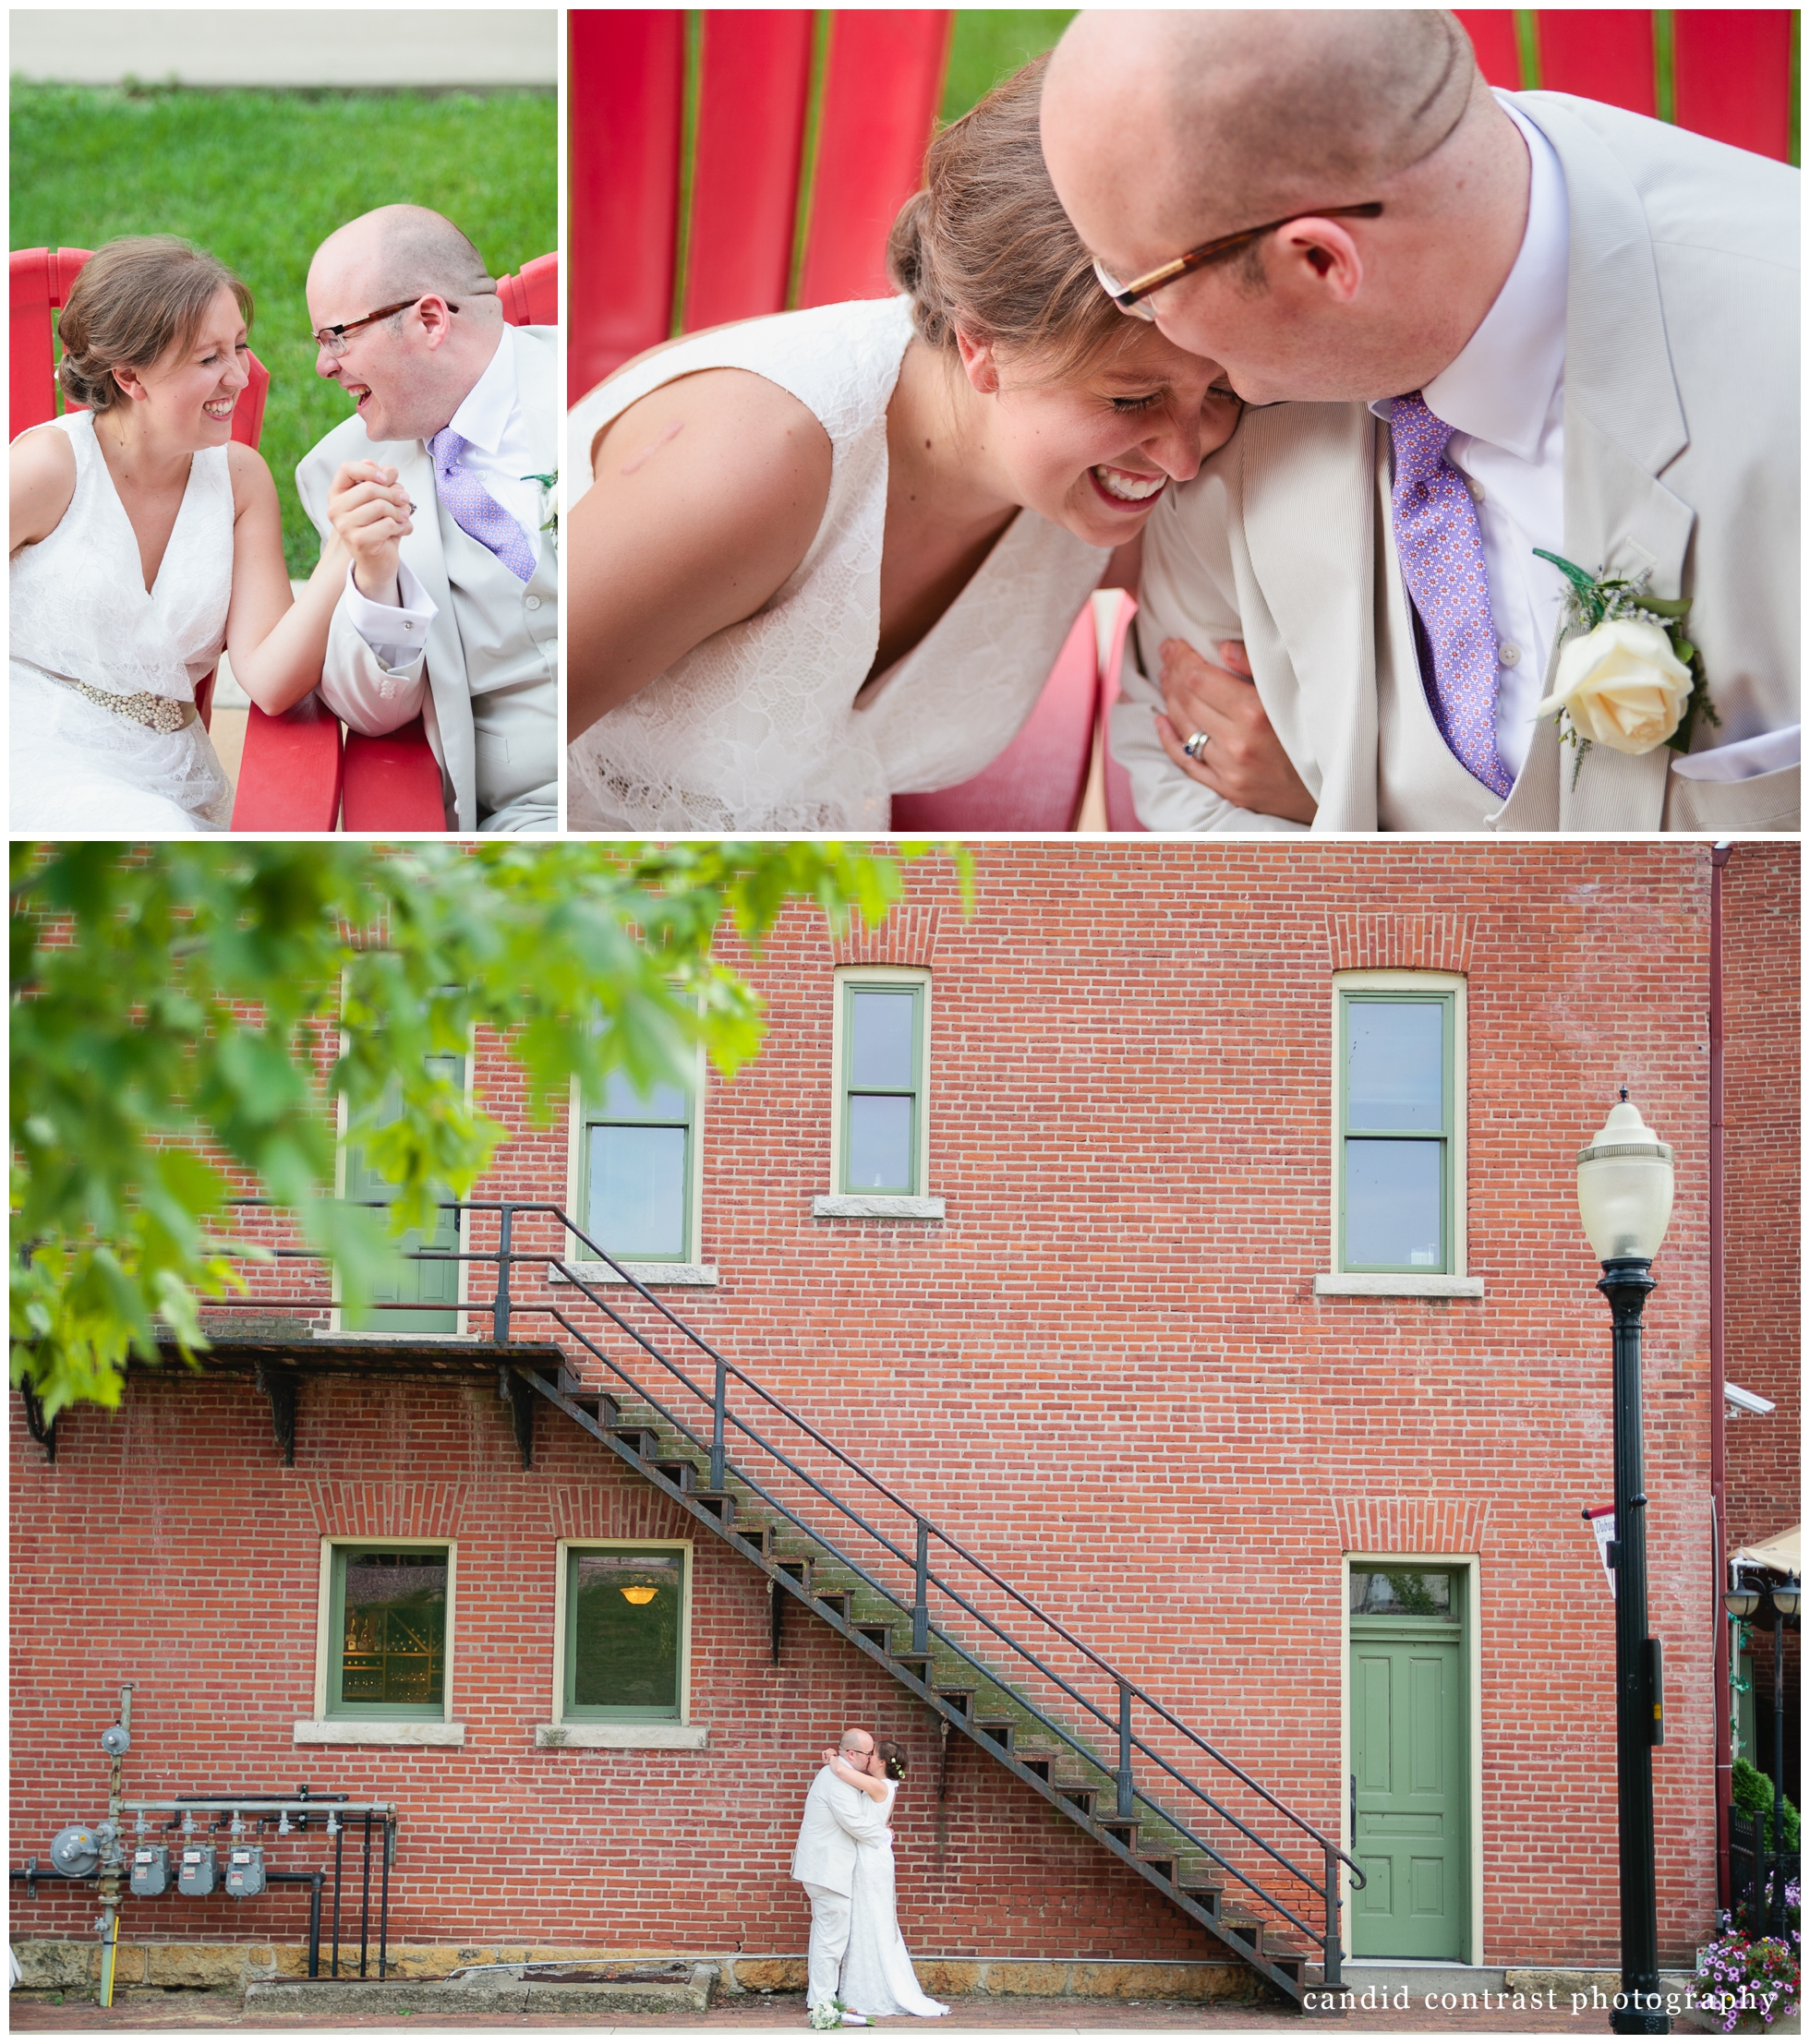 bride and groom at port of dubuque wedding, candid contrast photography